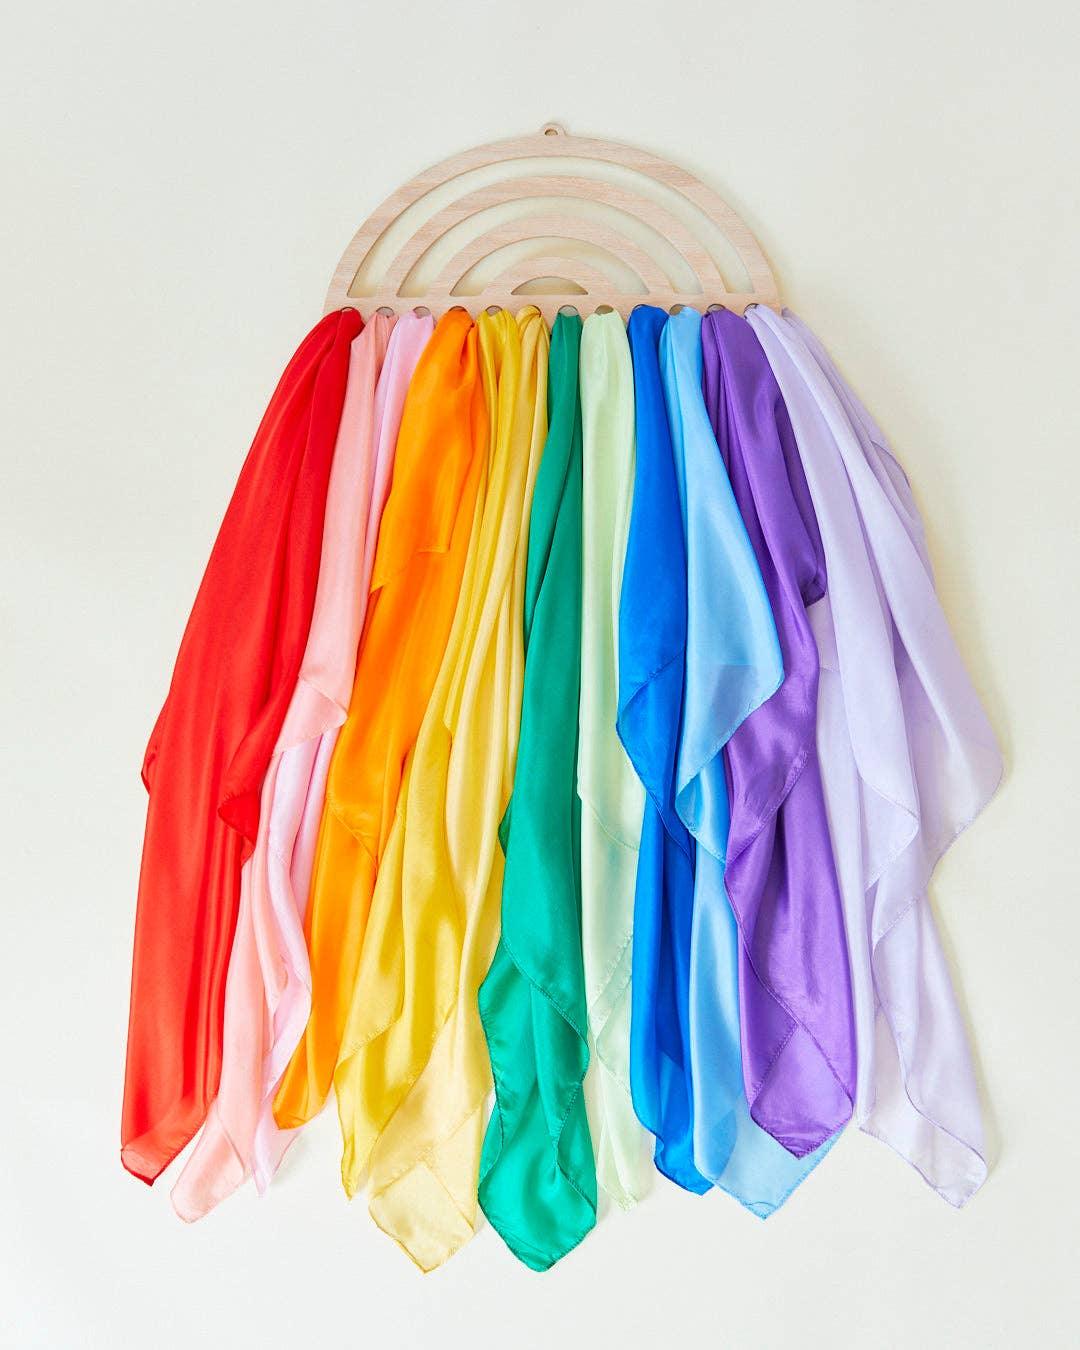 Large Playsilk Display - Rainbow Holder for Kids Room - Why and Whale